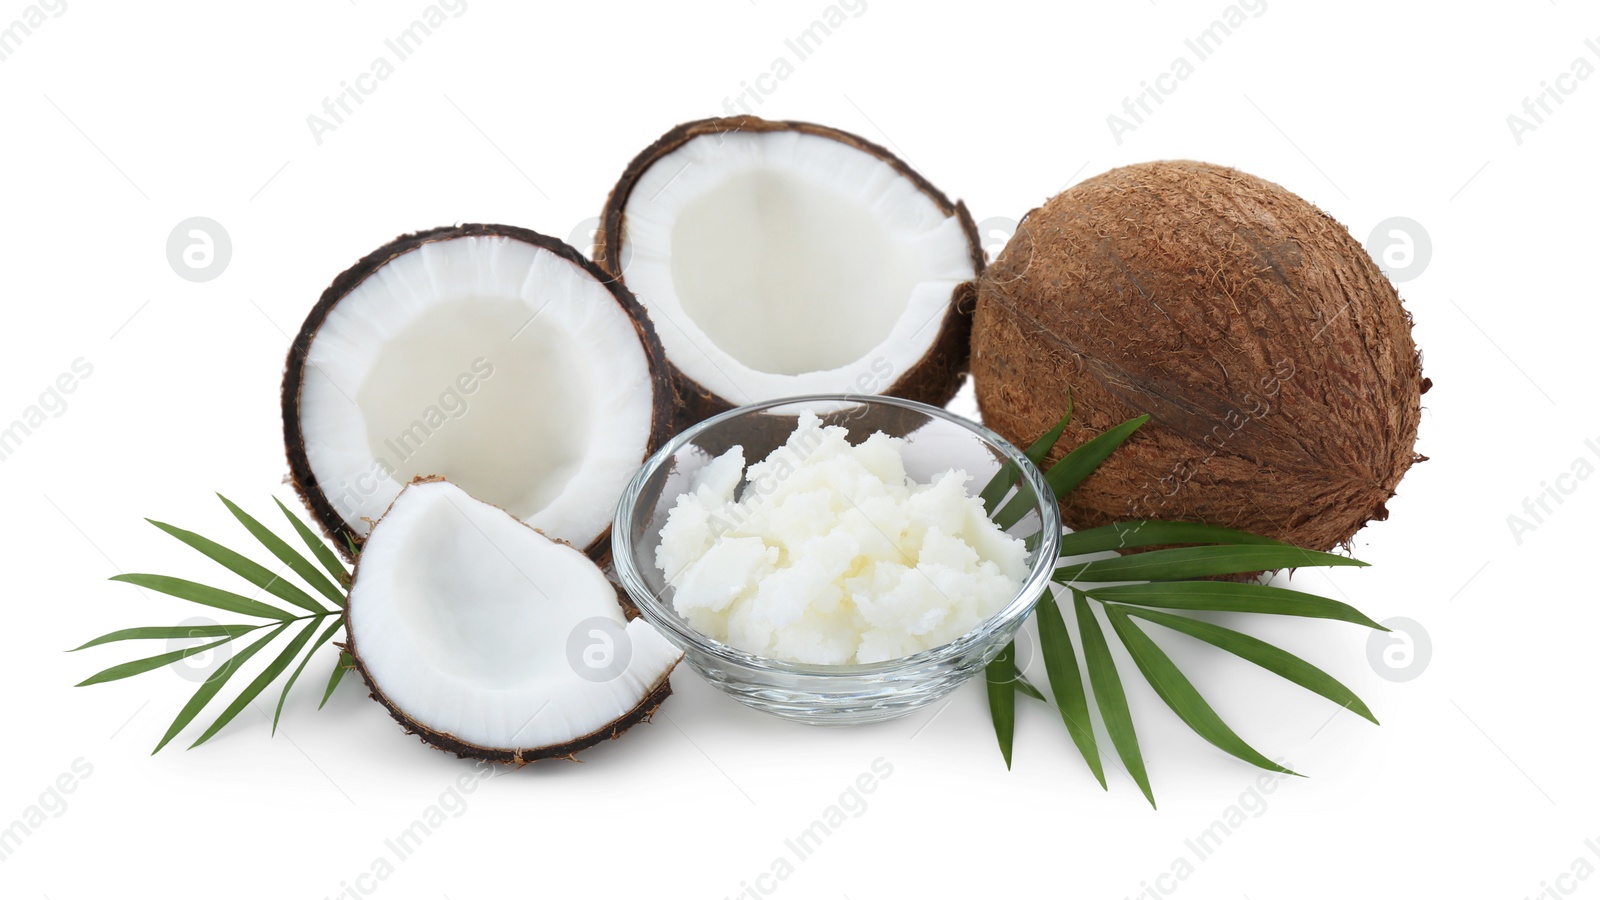 Photo of Organic coconut cooking oil, fresh fruits and leaves isolated on white